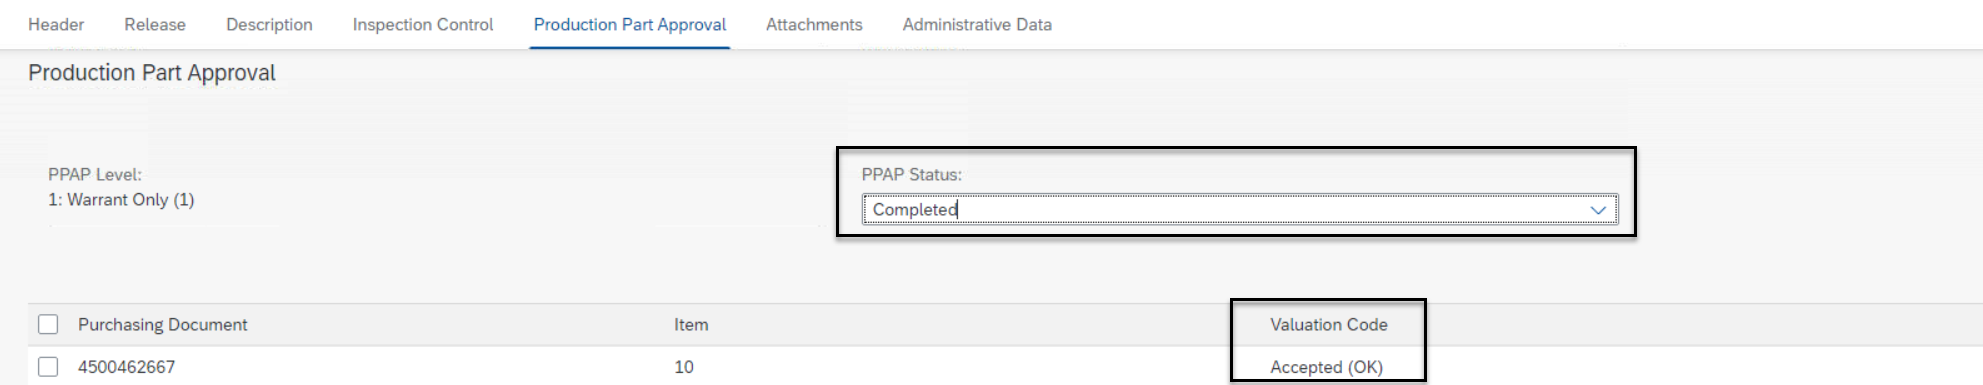 Status of purchasing document after usage decision and PPAP status maintenance